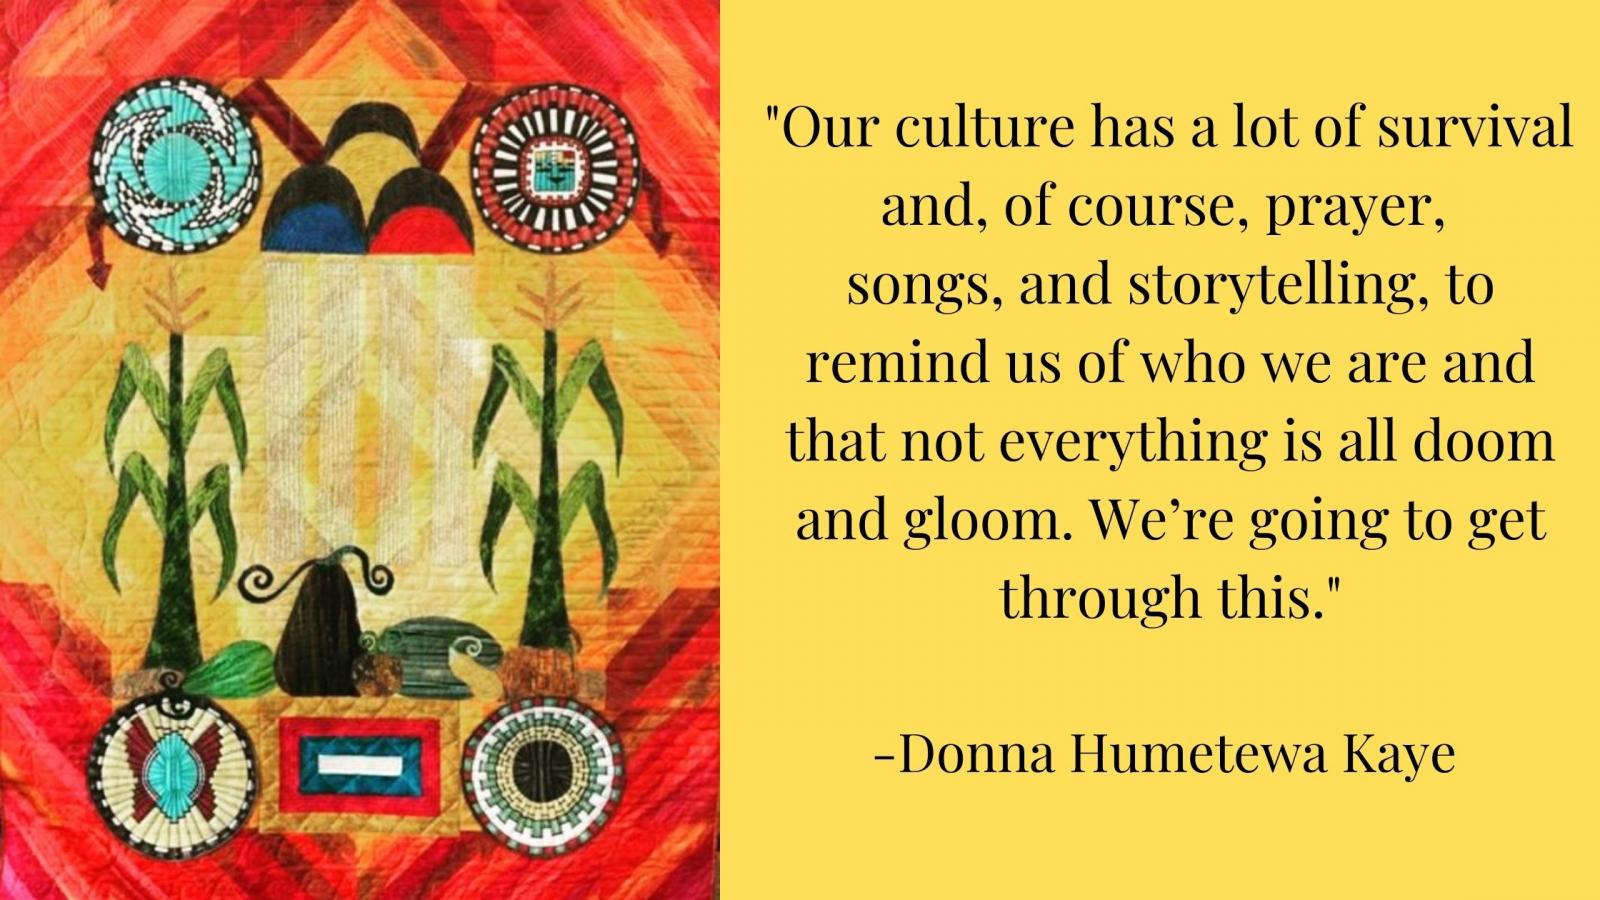 "Our culture has a lot of survival and, of course, prayer, songs, and storytelling, to remind us of who we are and that not everything is all doom and gloom. We’re going to get through this.” -Donna Humetewa Kaye 